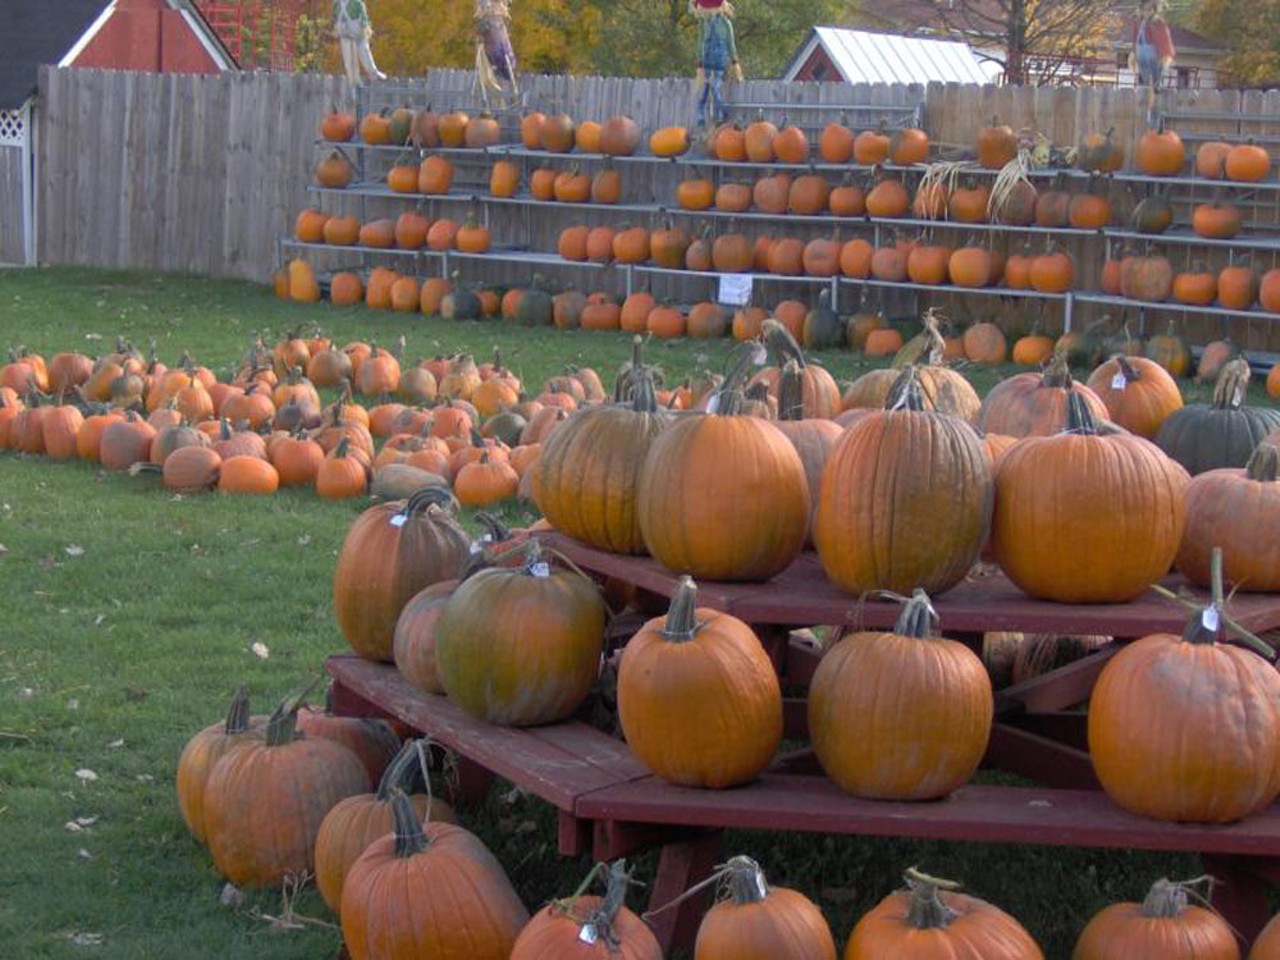 Mitchell Farm
Mitchell Farm has all the necessities to turn your house into a festive fall space. Mums, pumpkins, and corn stalks are all available. On the weekends there are hayrides that will take you and the family into the pumpkin patch to get your own pumpkin. 
3404 Mitchell Rd., Holly
248-634-4753
Open everyday from 9 a.m.- 6 p.m.